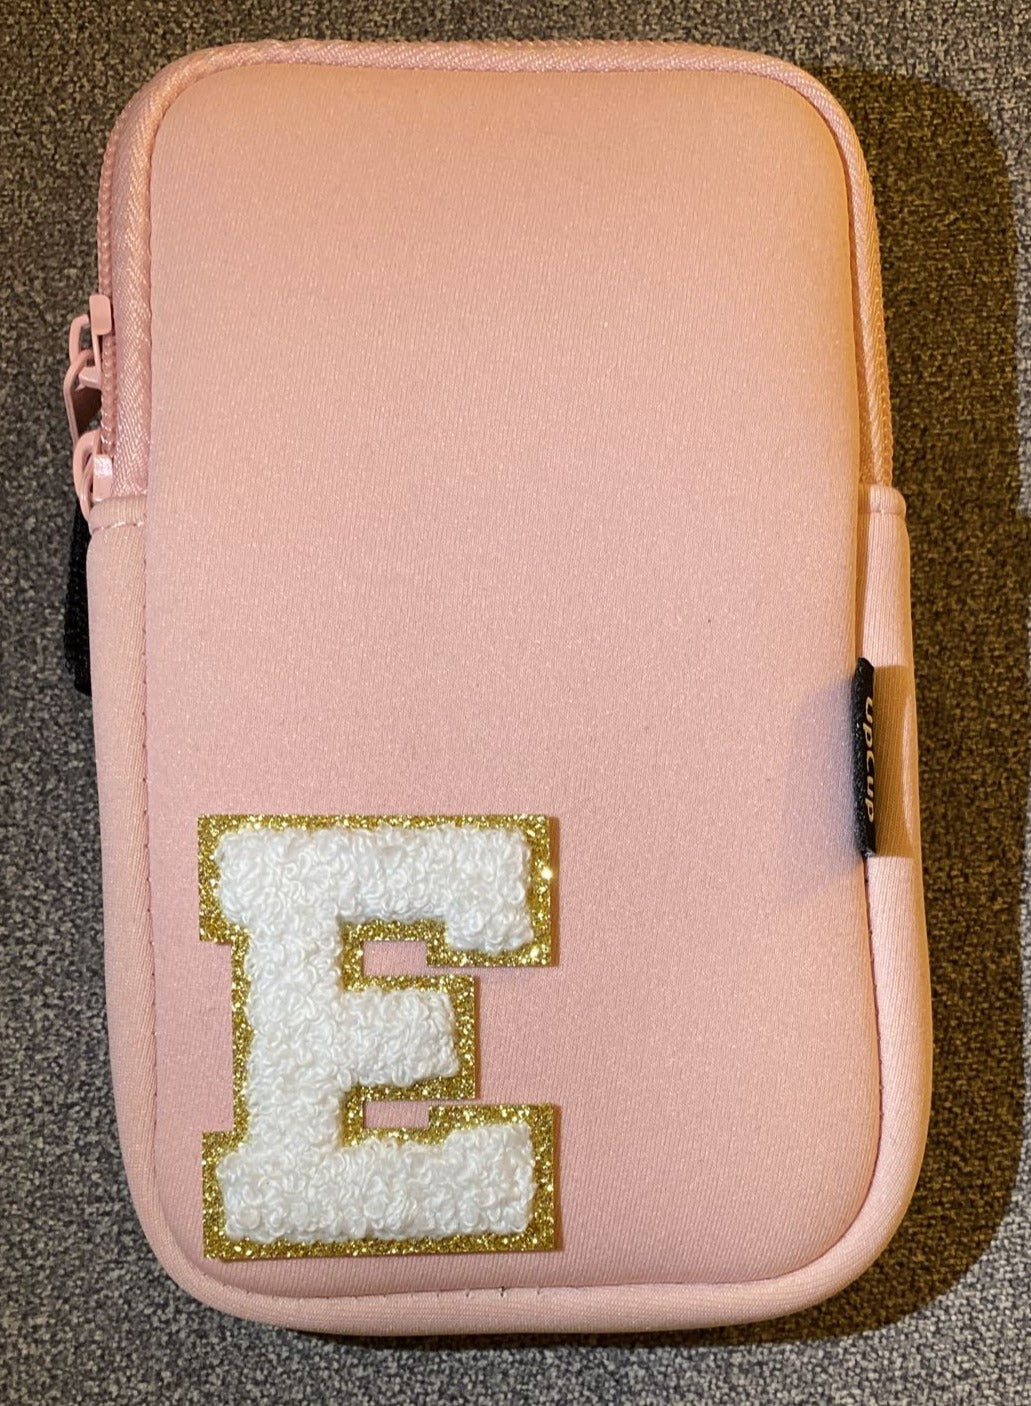 PINK - Personalized Bottle Pouch